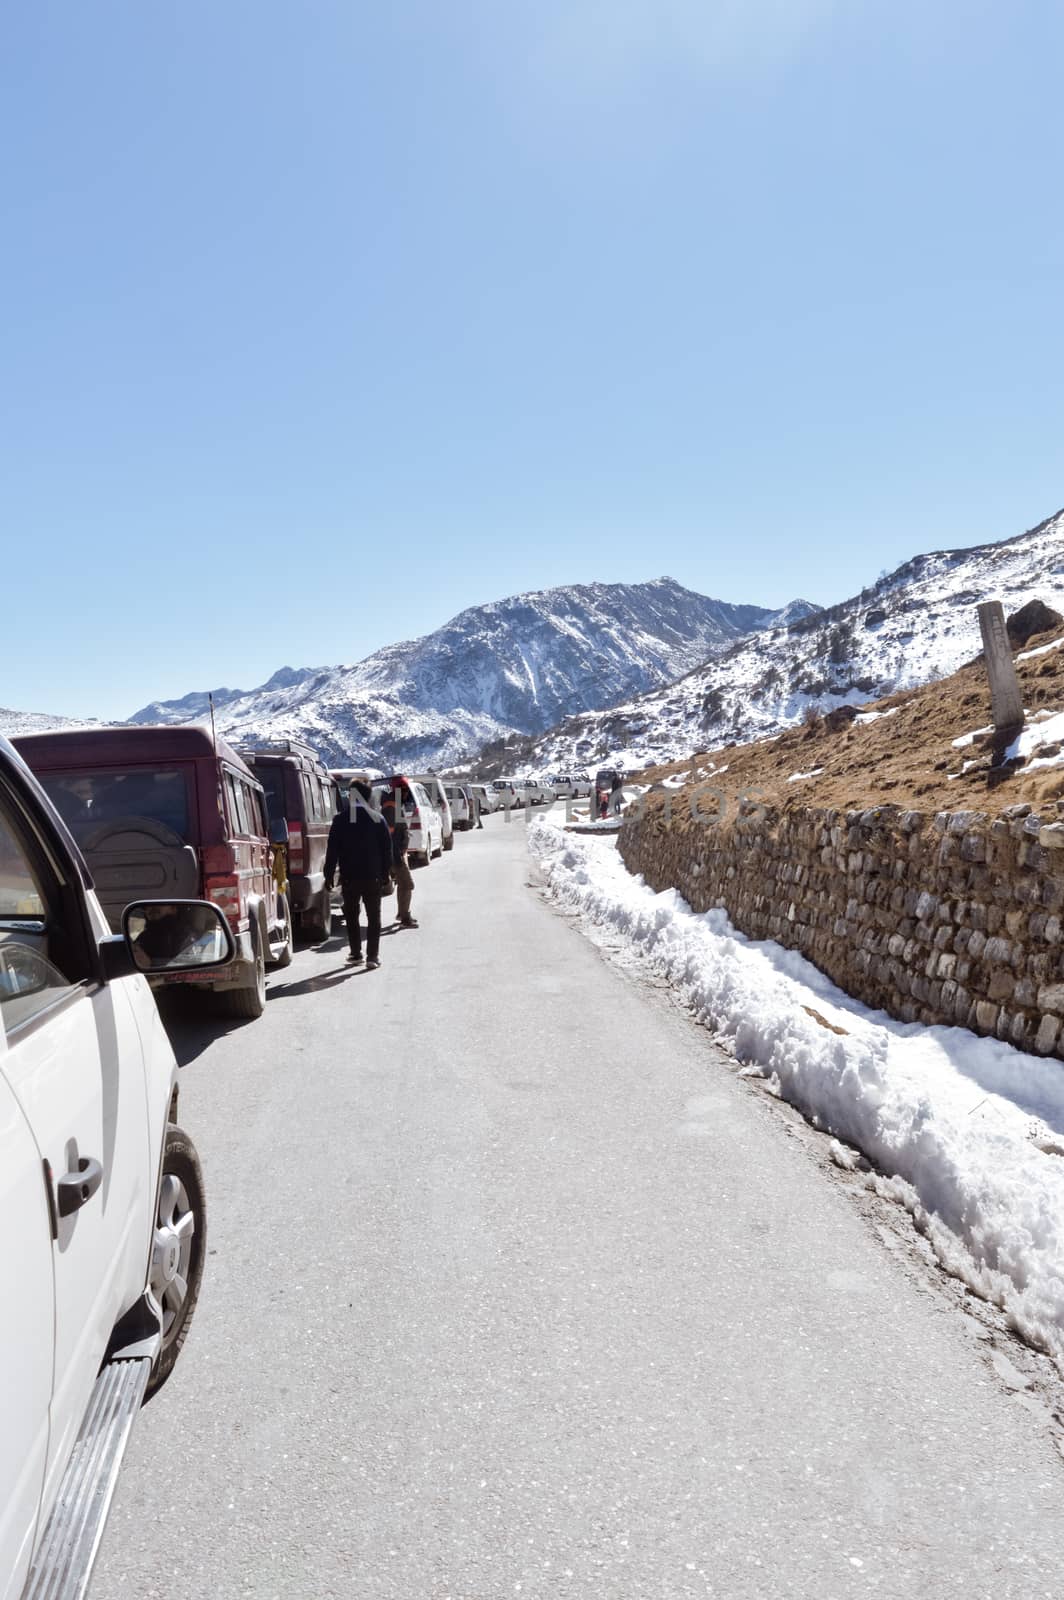 Traffic jam and Highway blockage due to snowfall at Tsomgo Lake. Tourist vehicles lined up to climb in step hill region of himalayan mountain valley. by sudiptabhowmick